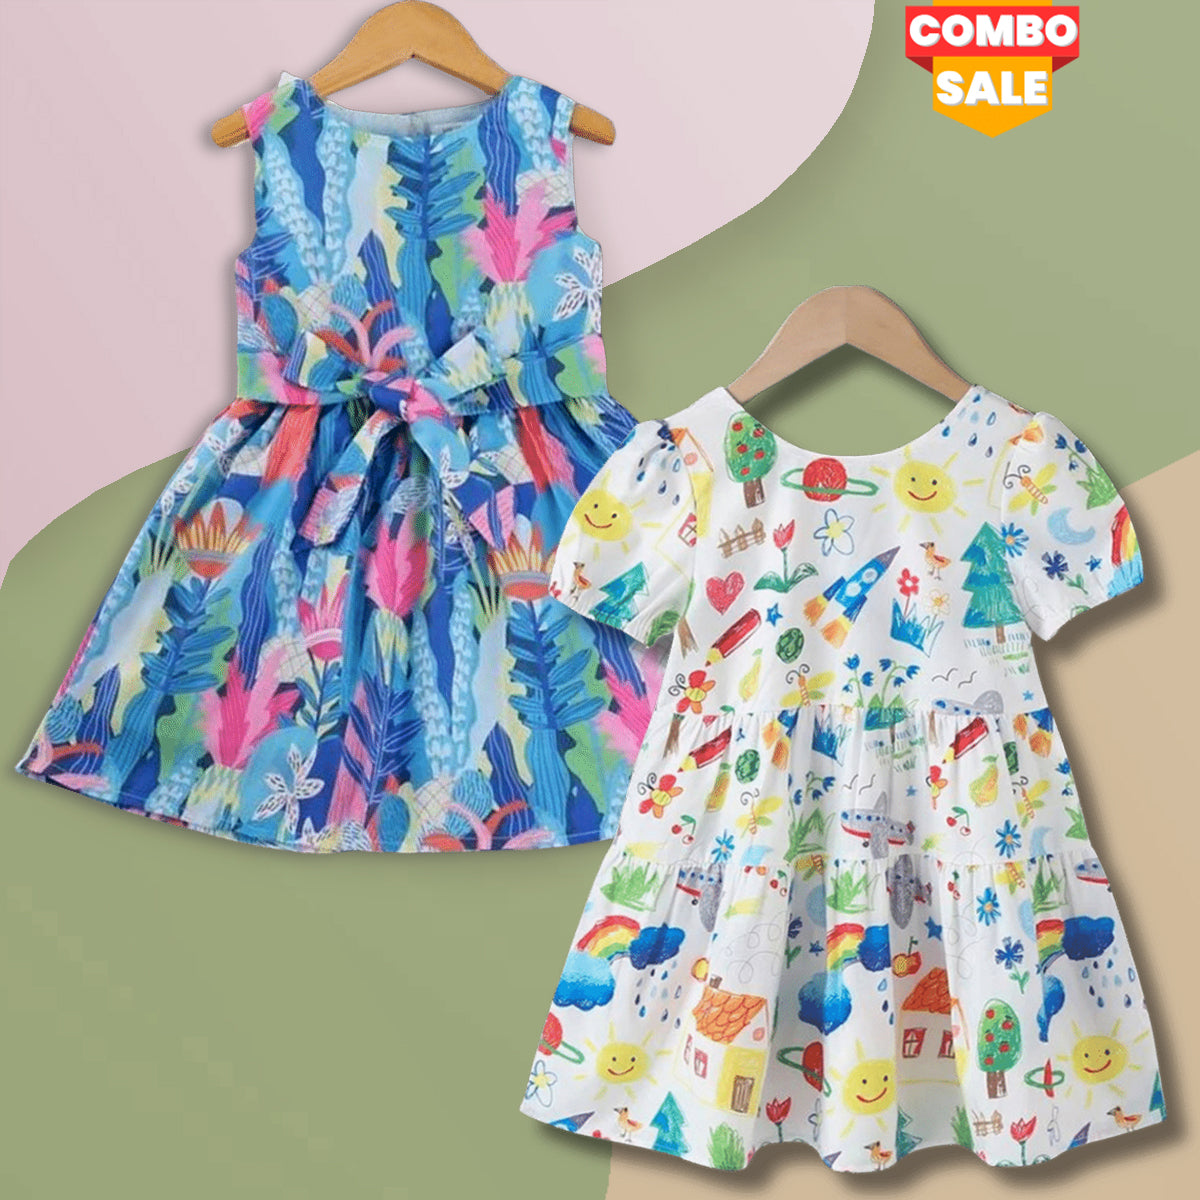 BabyGirl Cotton Pencil Drawing & Multicolor Designer Tunic Dress Combo Pack for Baby Girls.